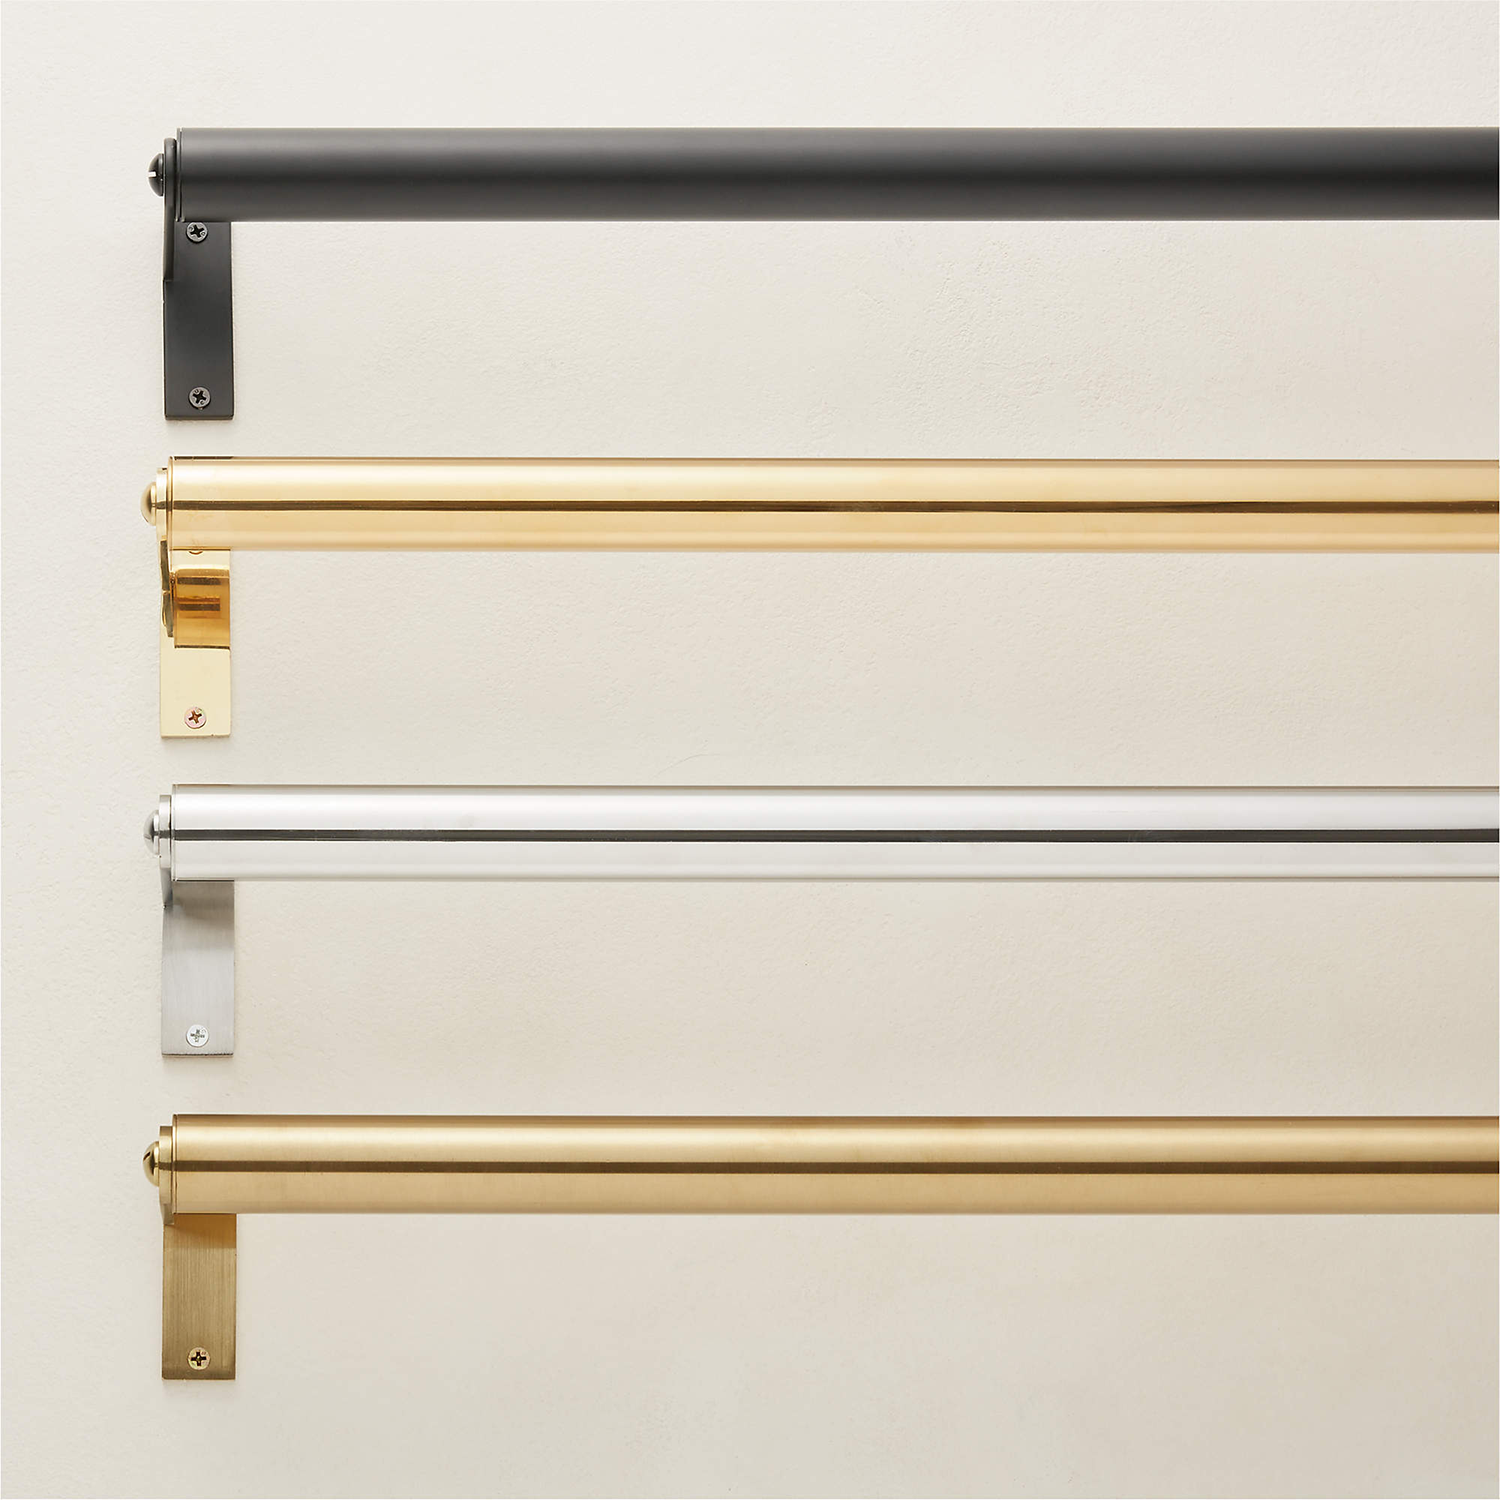 four different finishes of curtain rods